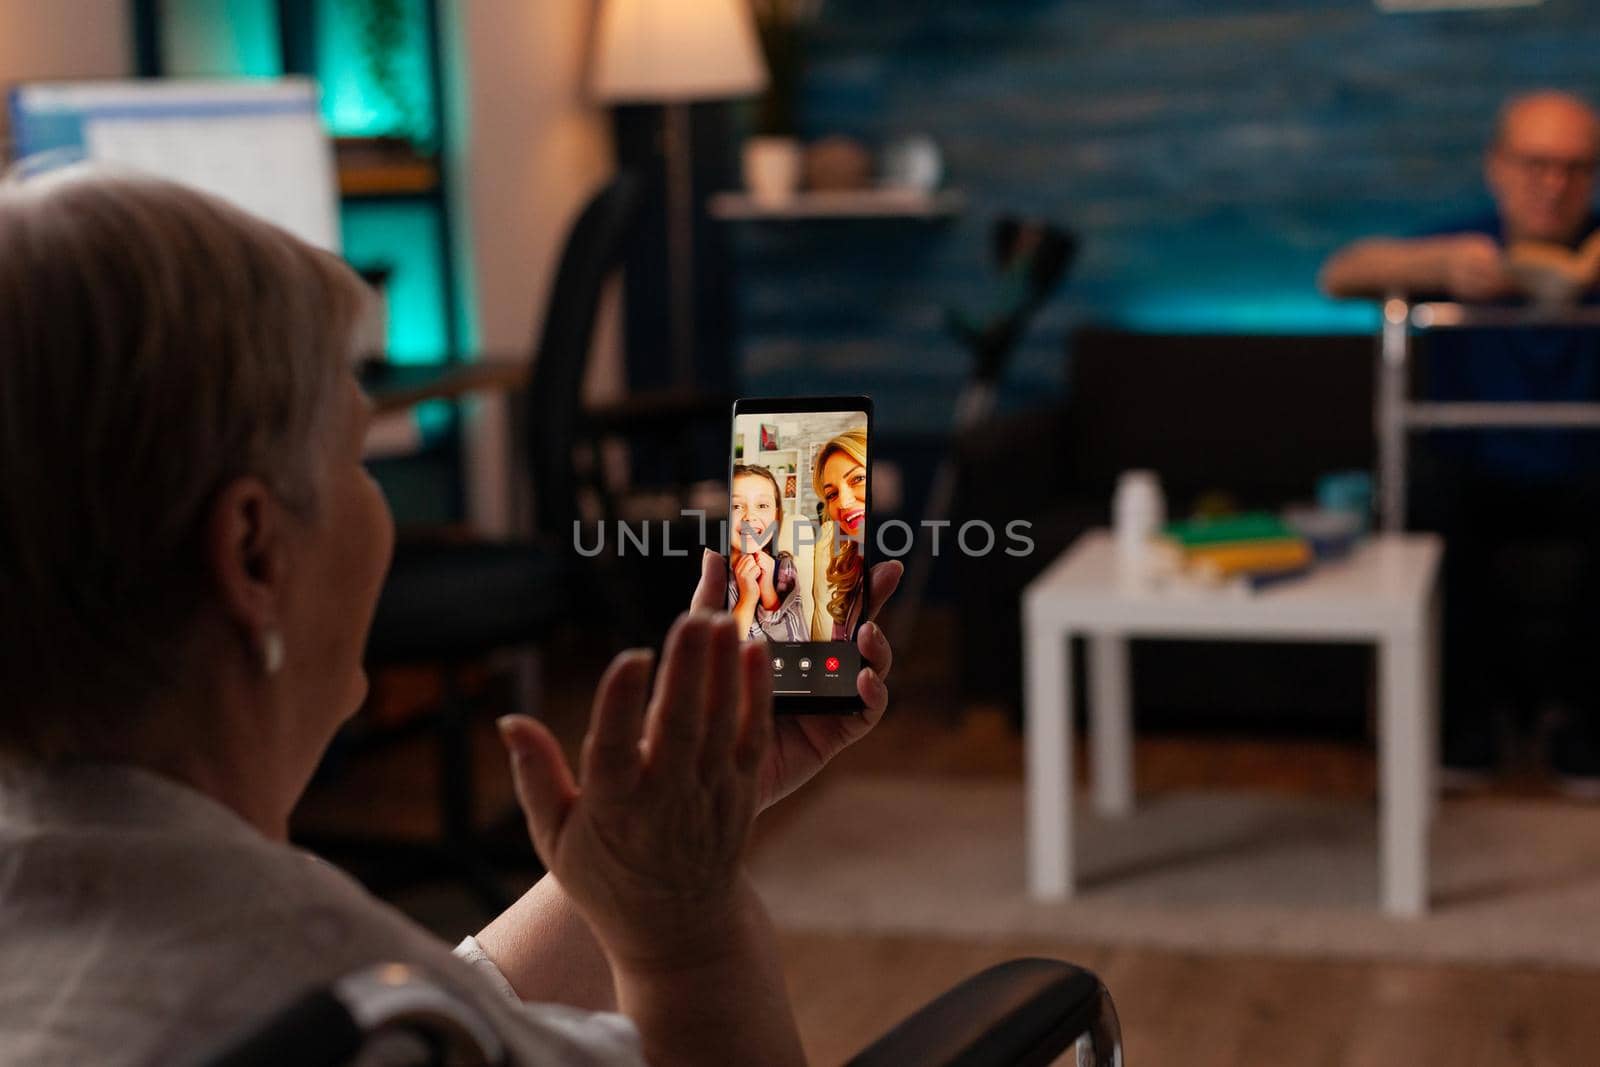 Grandmother talking to family on internet video call using online smartphone technology at home. Retired woman enjoying chat with daughter and niece while sitting in living room with grandfather